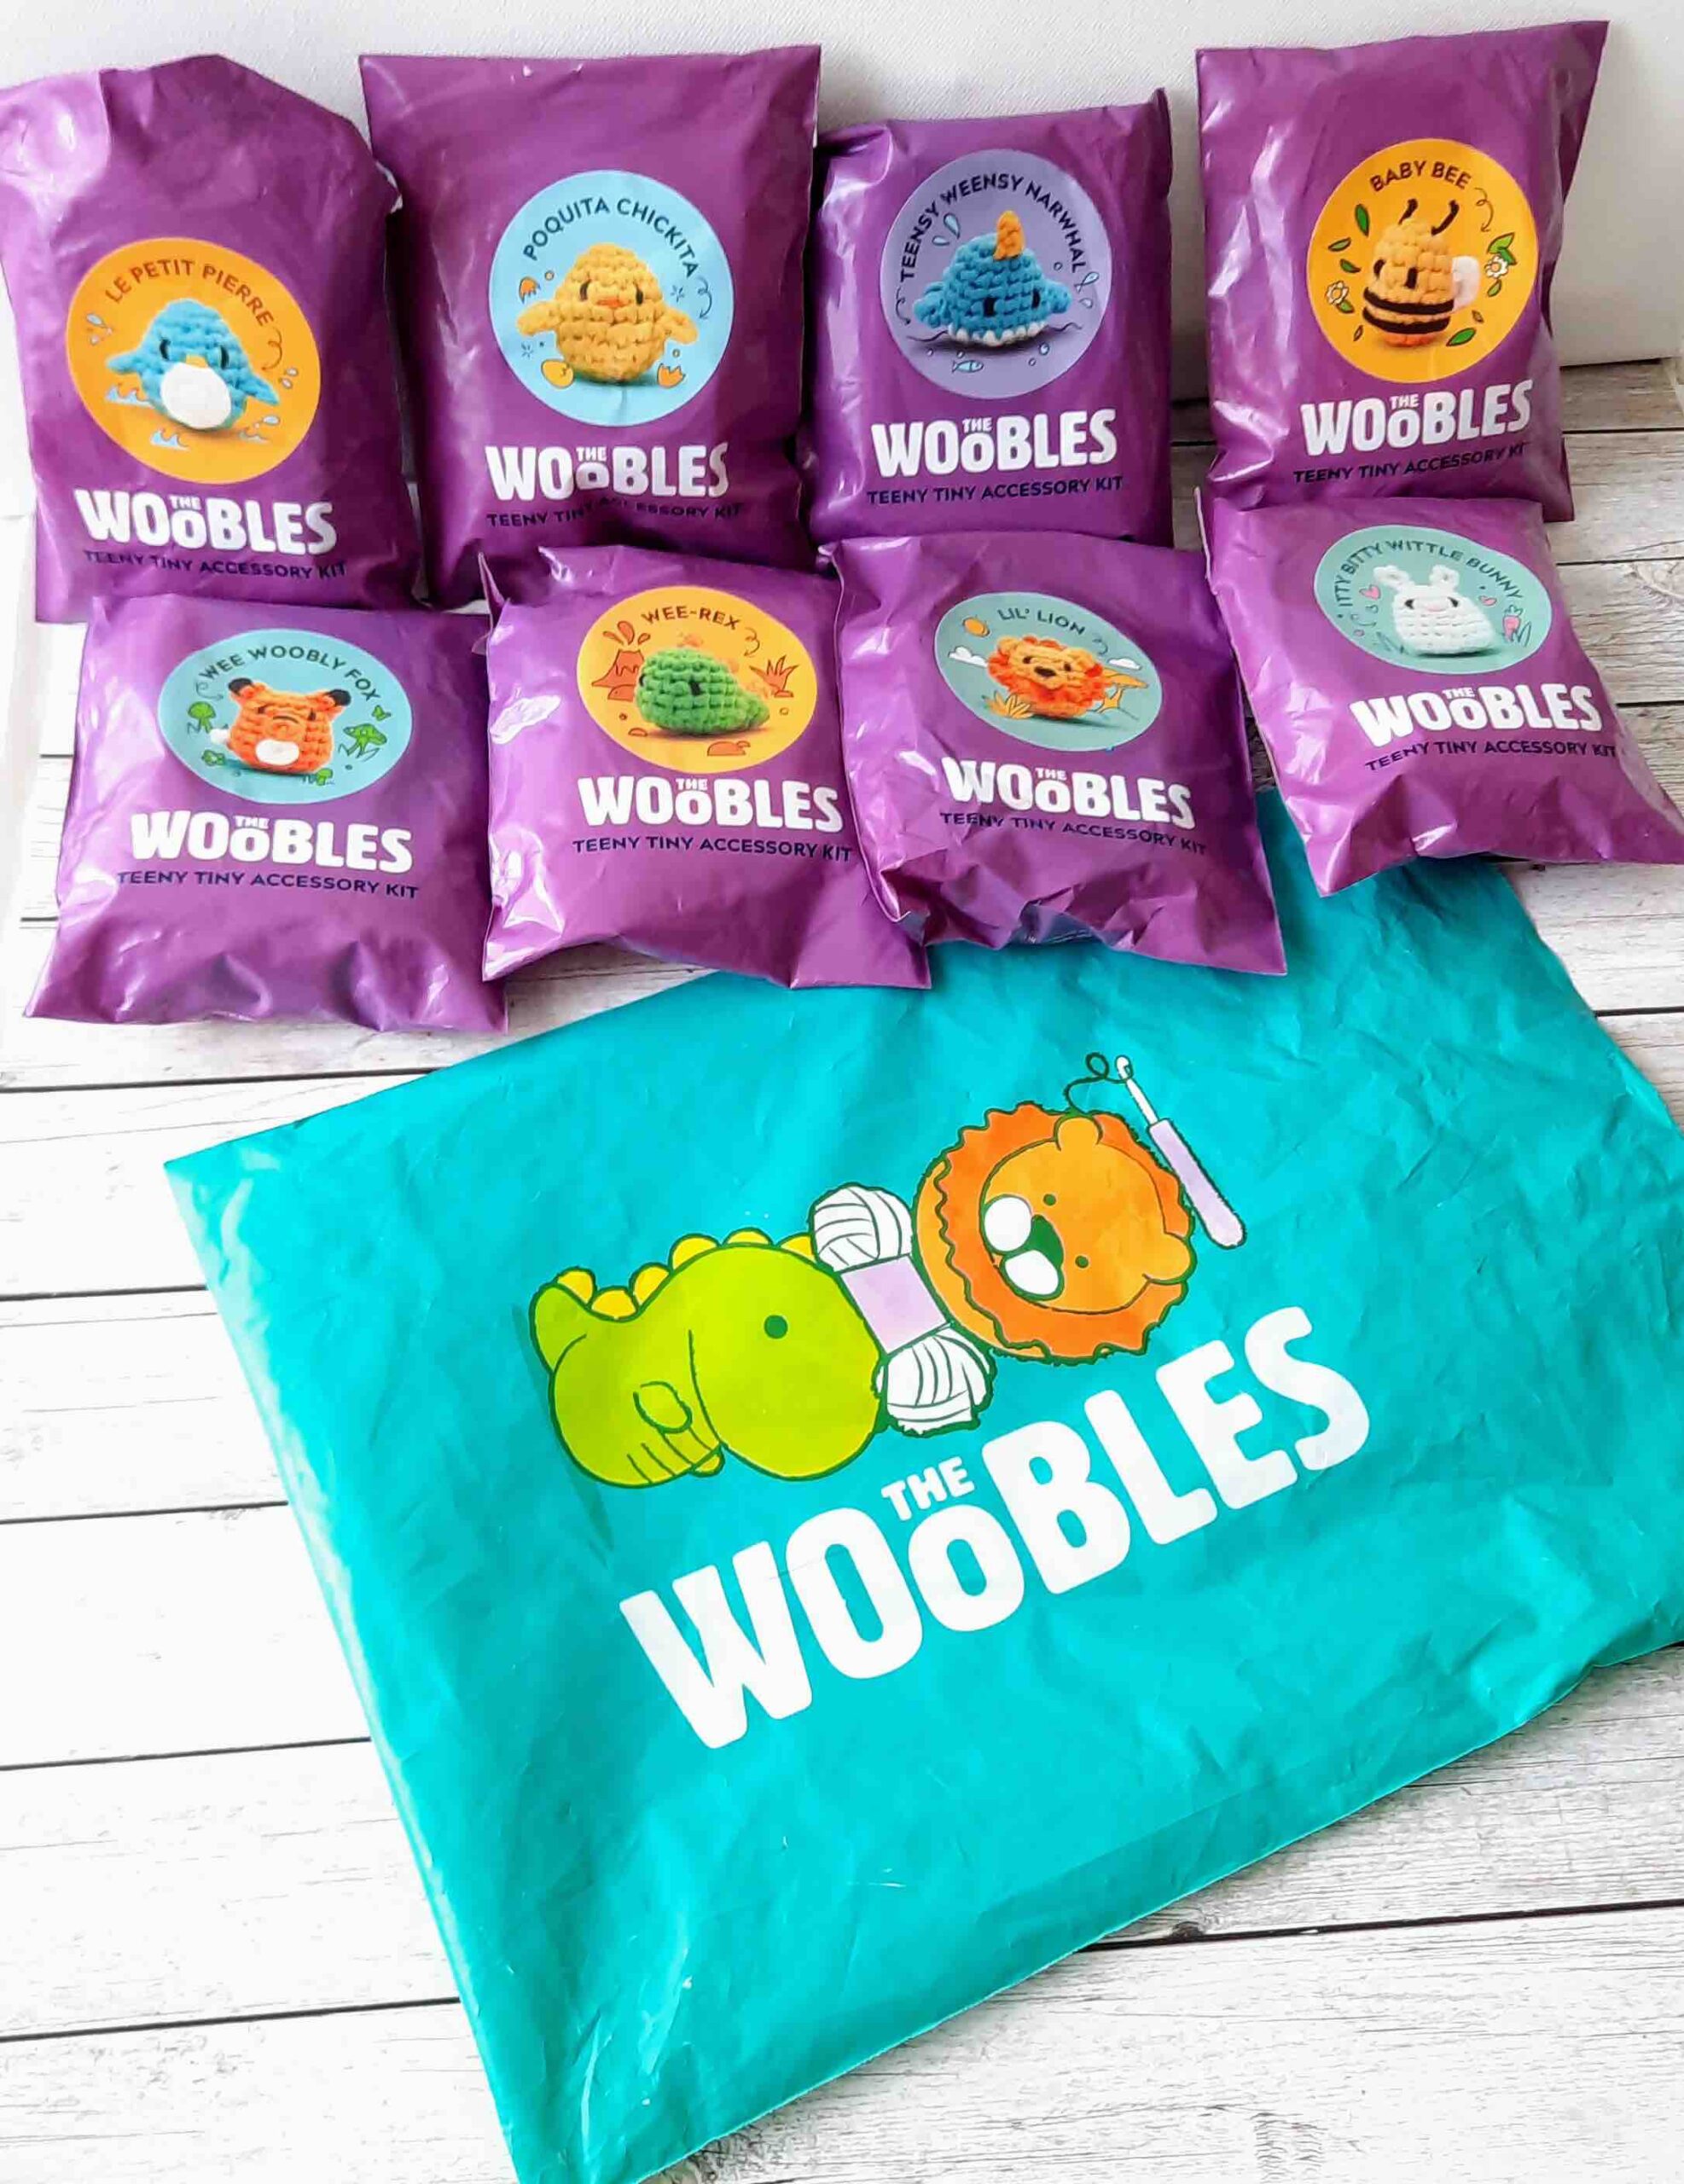 The Woobles Crochet Kit Wee Wittle Woobles Bundle